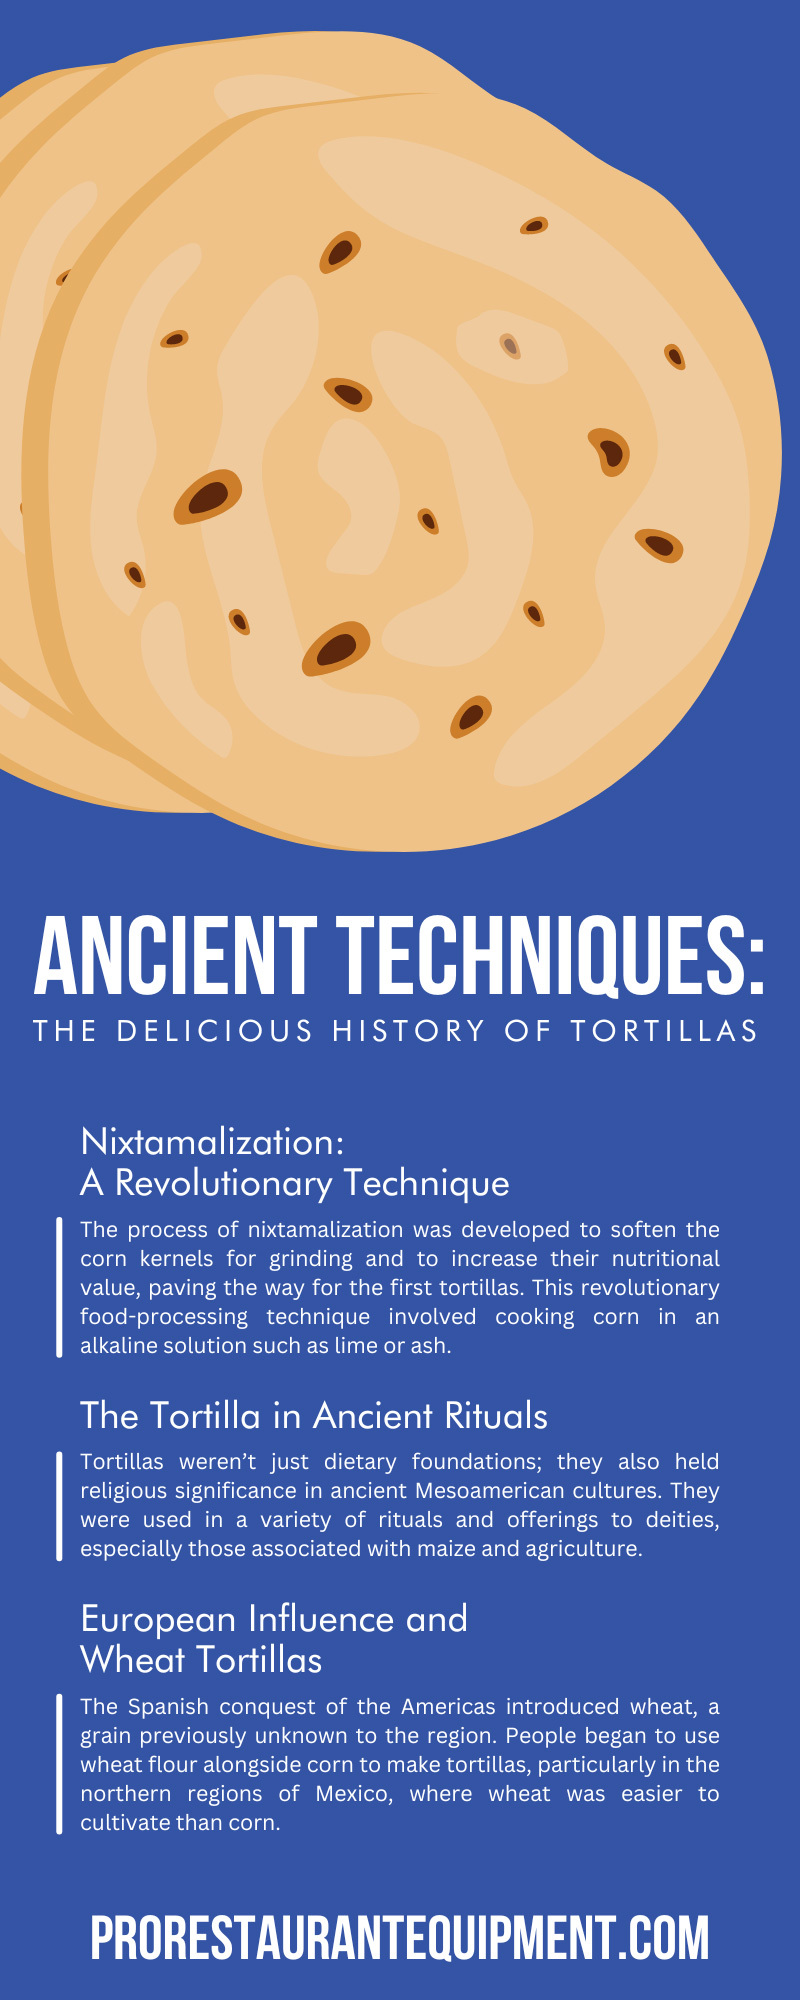 Ancient Techniques: The Delicious History of Tortillas
